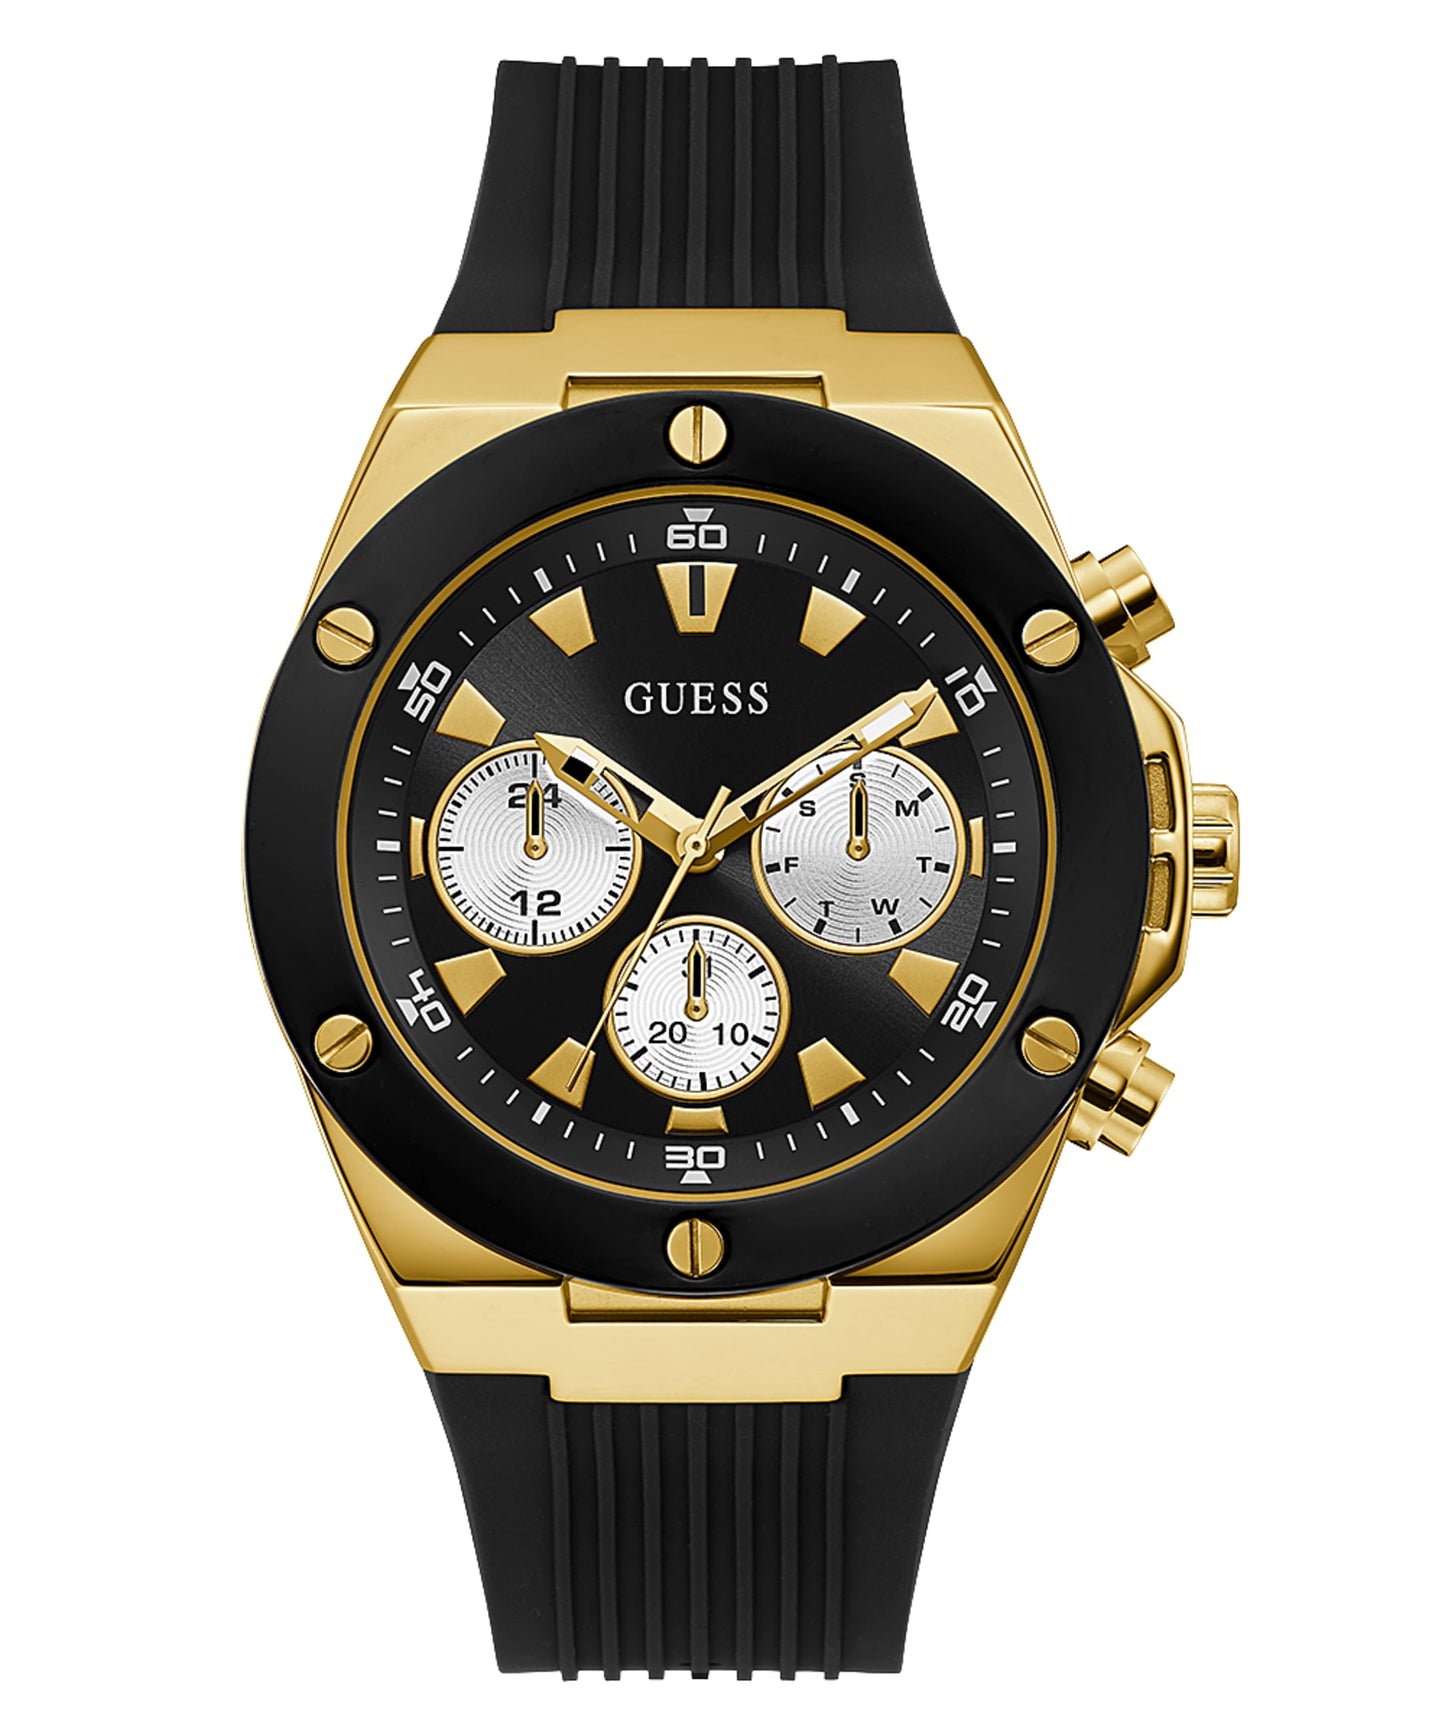 Guess Men's Gold-Tone And Black Chrono-Look Multifunction Watch